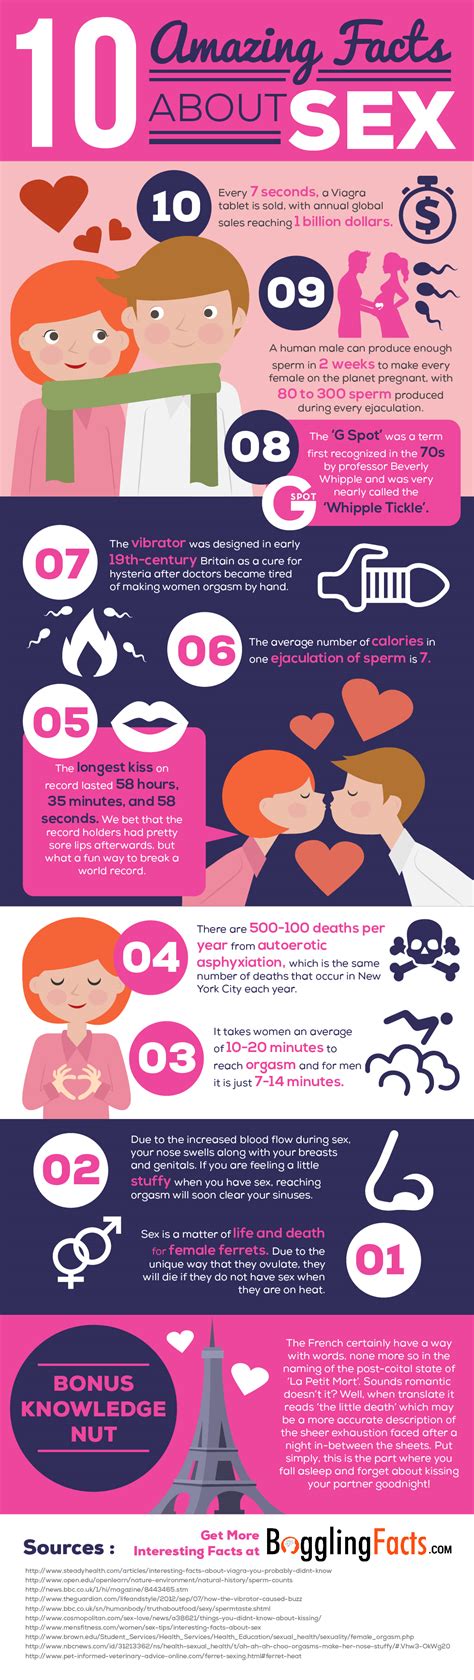 10 interesting facts about sex to blow you away [infographic]